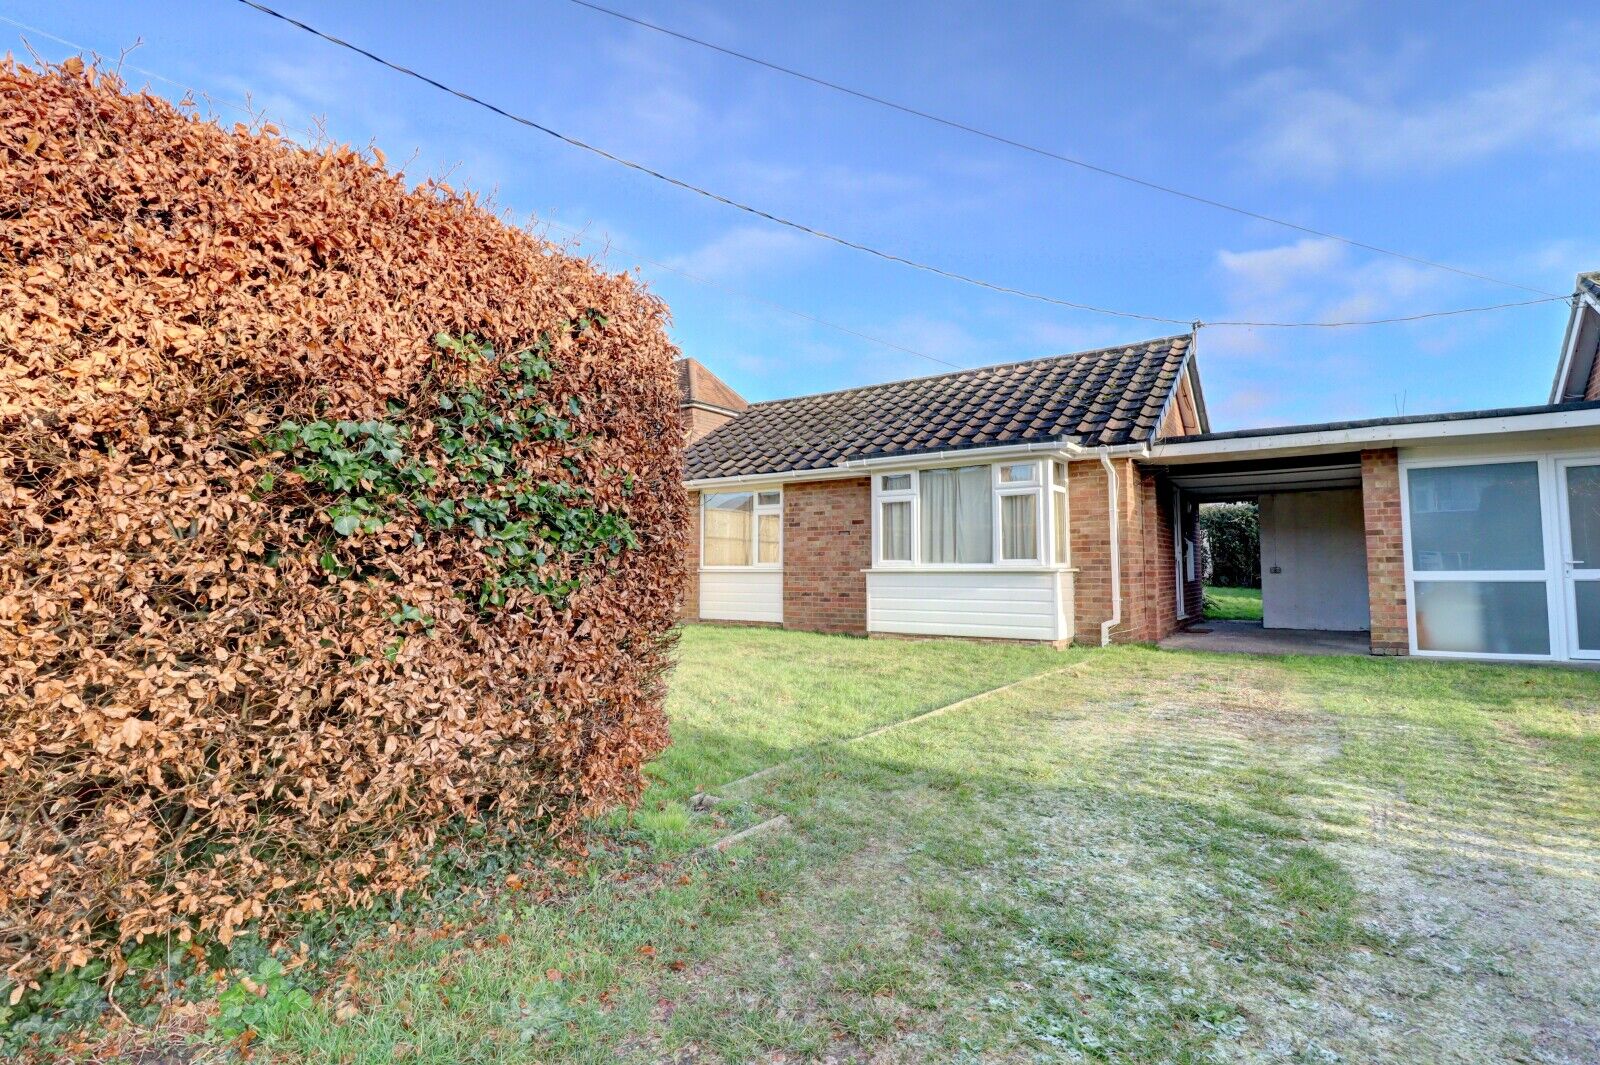 2 bedroom detached bungalow for sale New Pond Road, Holmer Green, HP15, main image